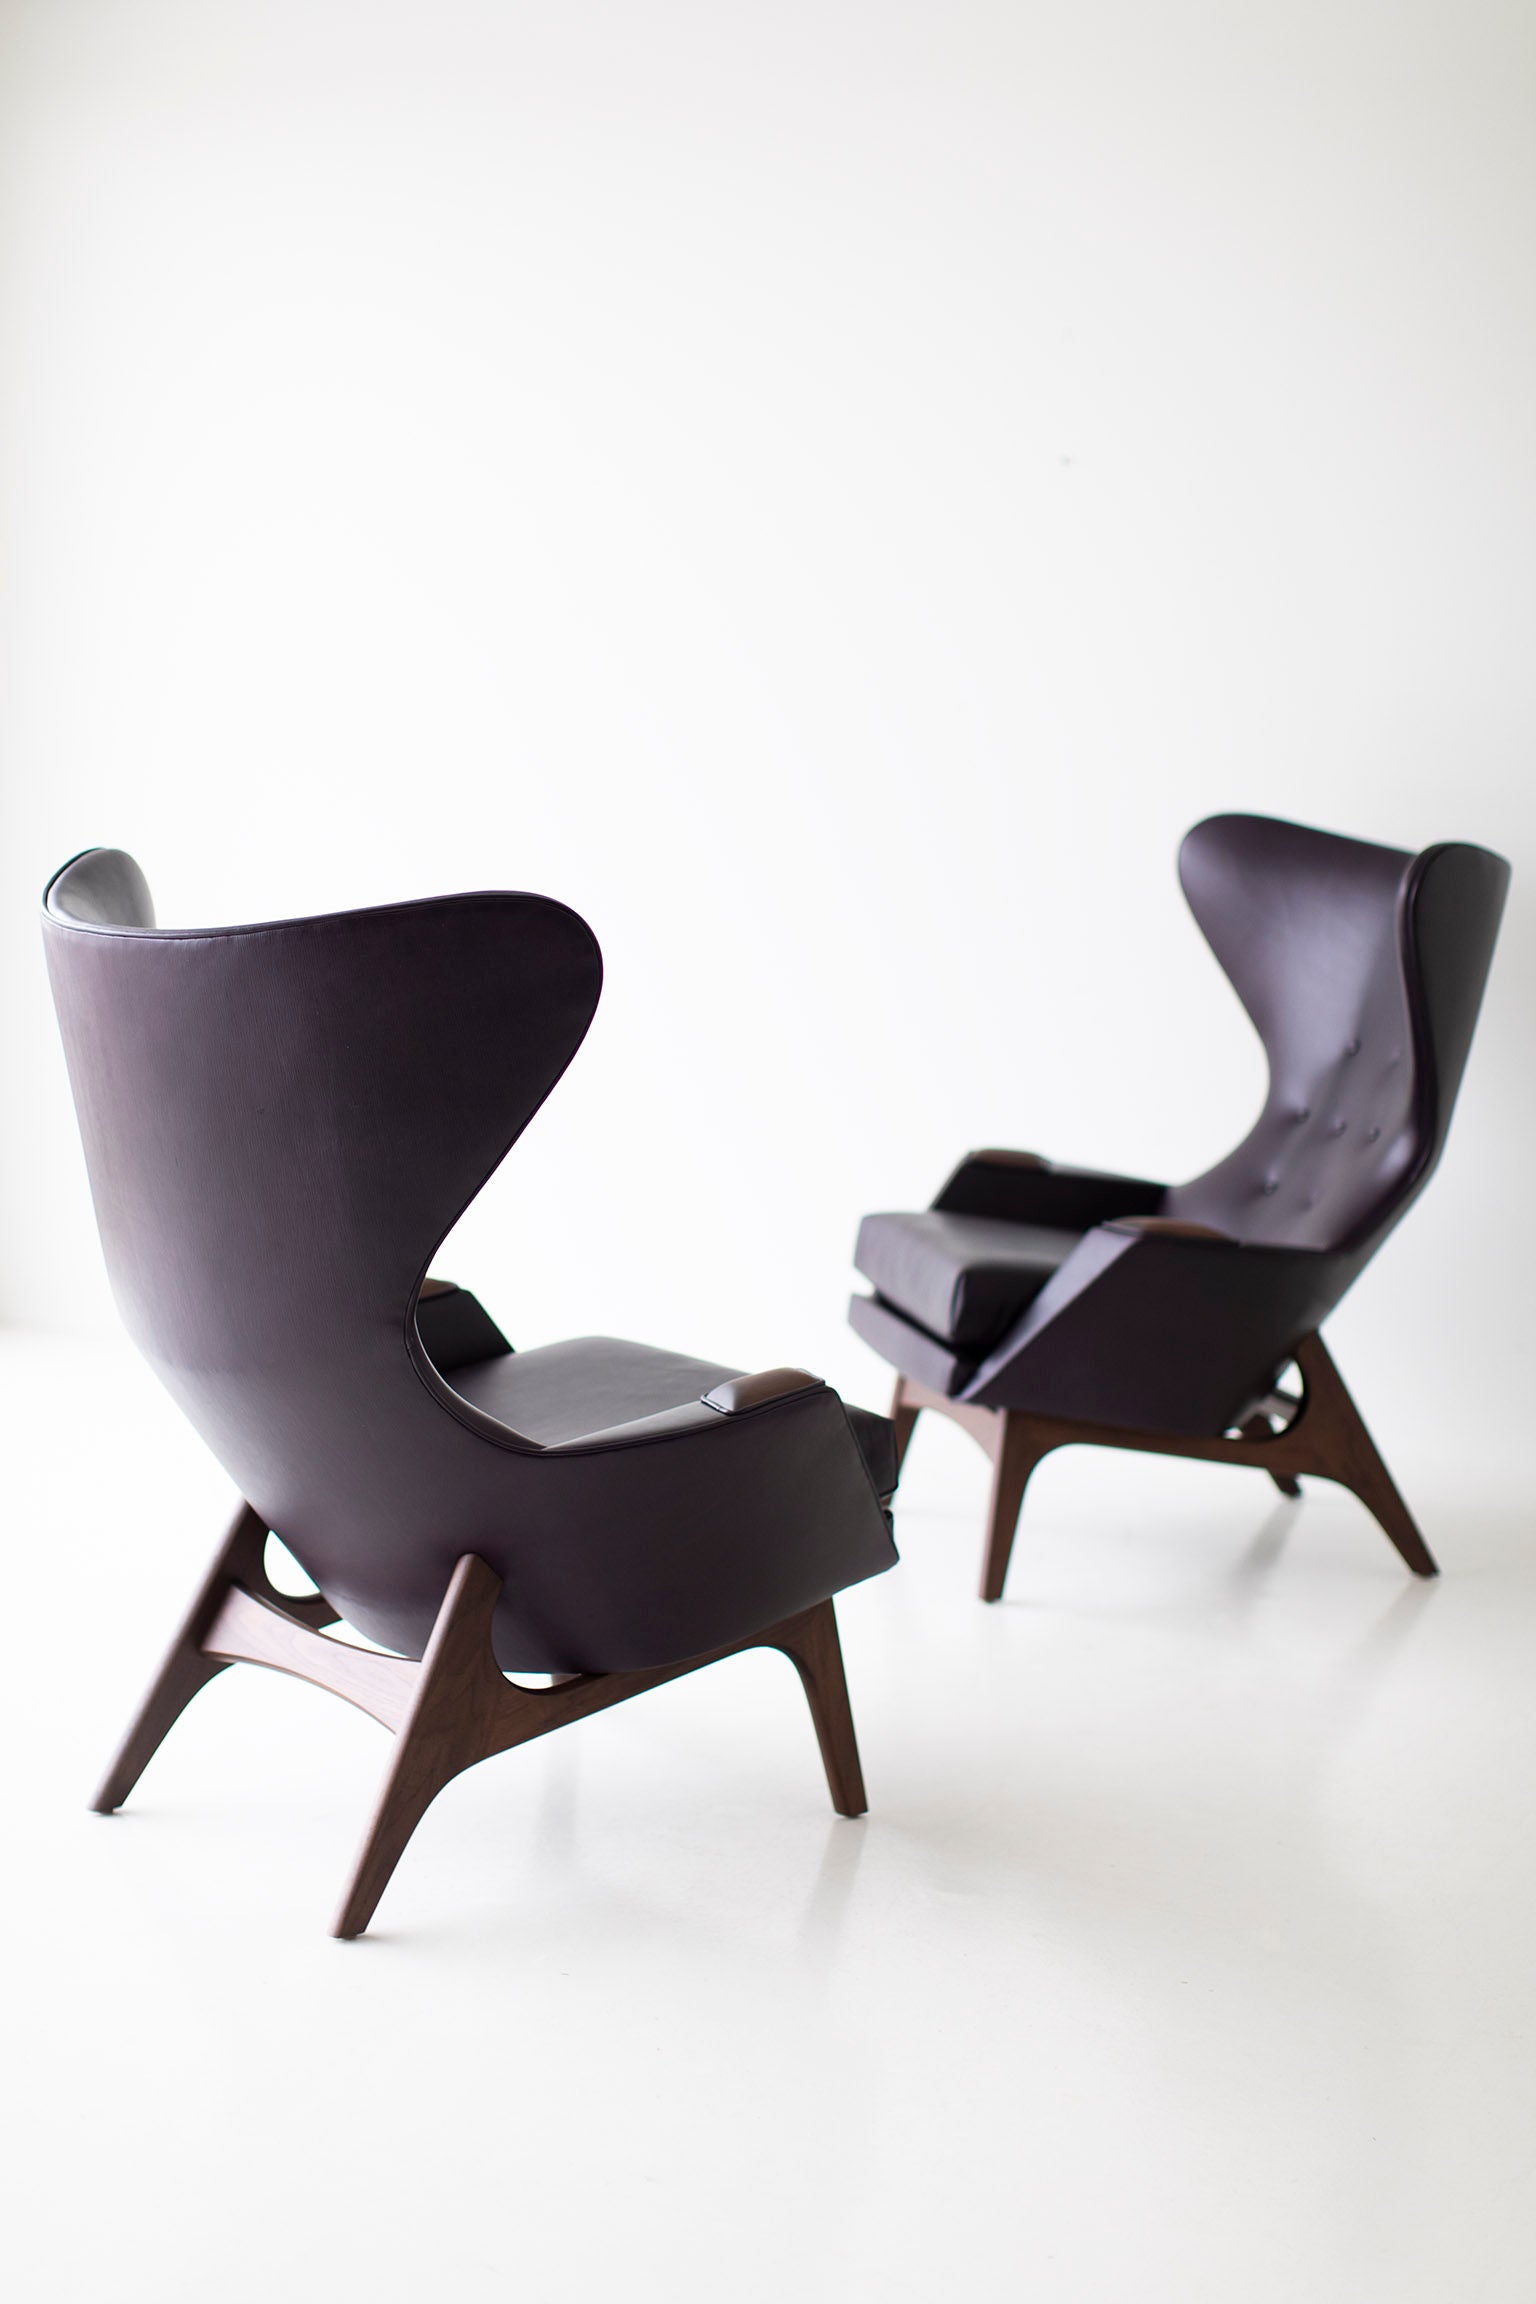 0T3A9981-large-leather-wing-chairs-1407-01